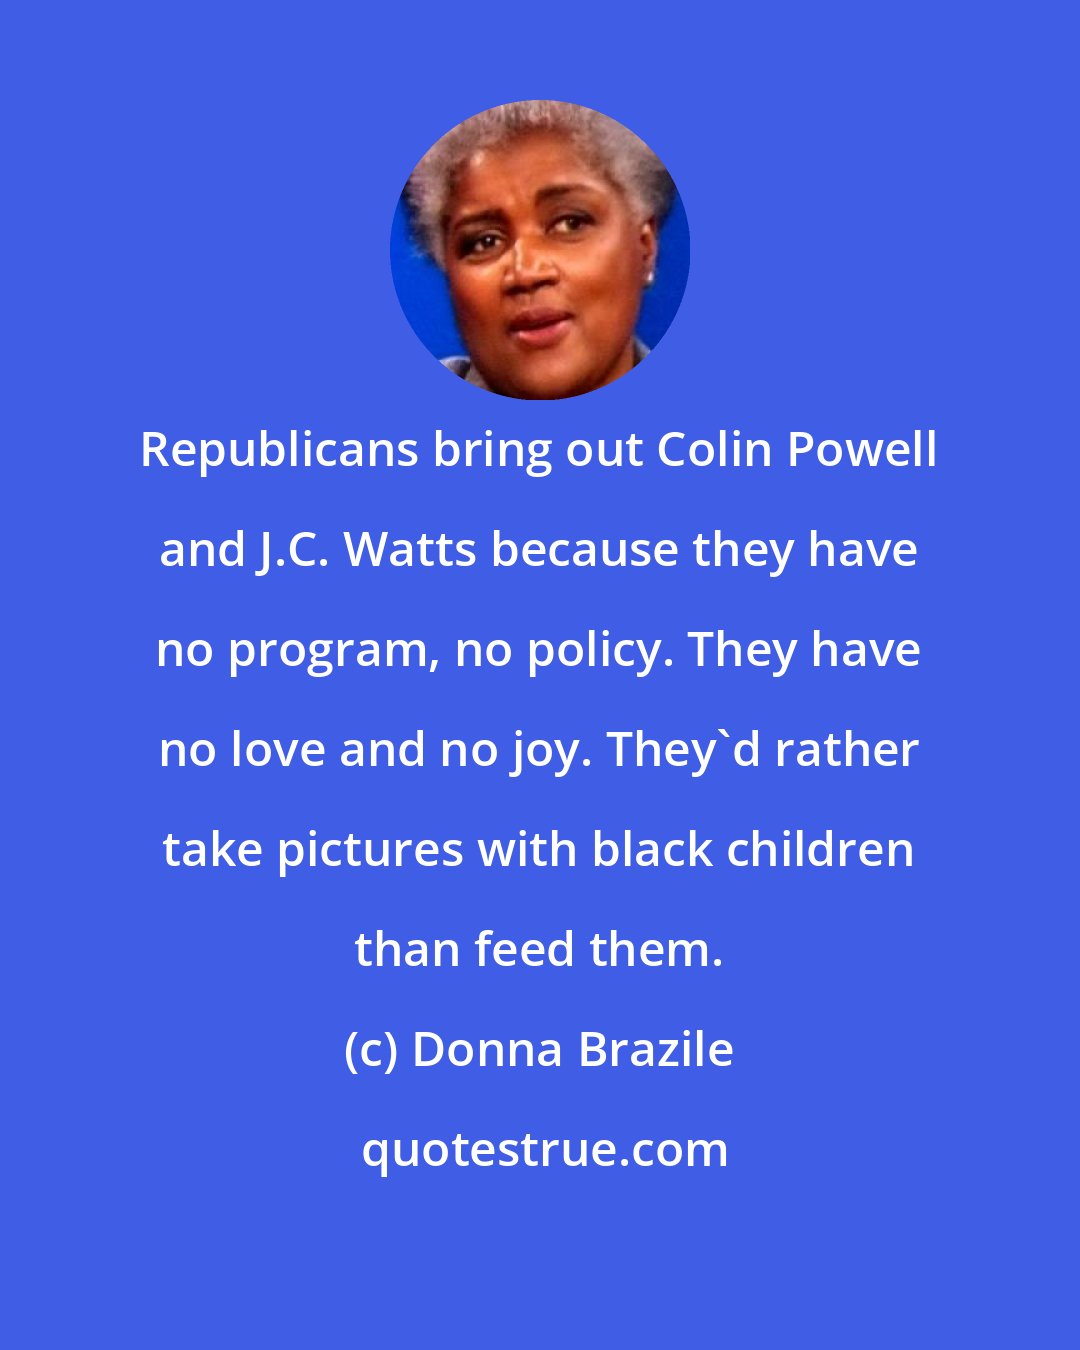 Donna Brazile: Republicans bring out Colin Powell and J.C. Watts because they have no program, no policy. They have no love and no joy. They'd rather take pictures with black children than feed them.